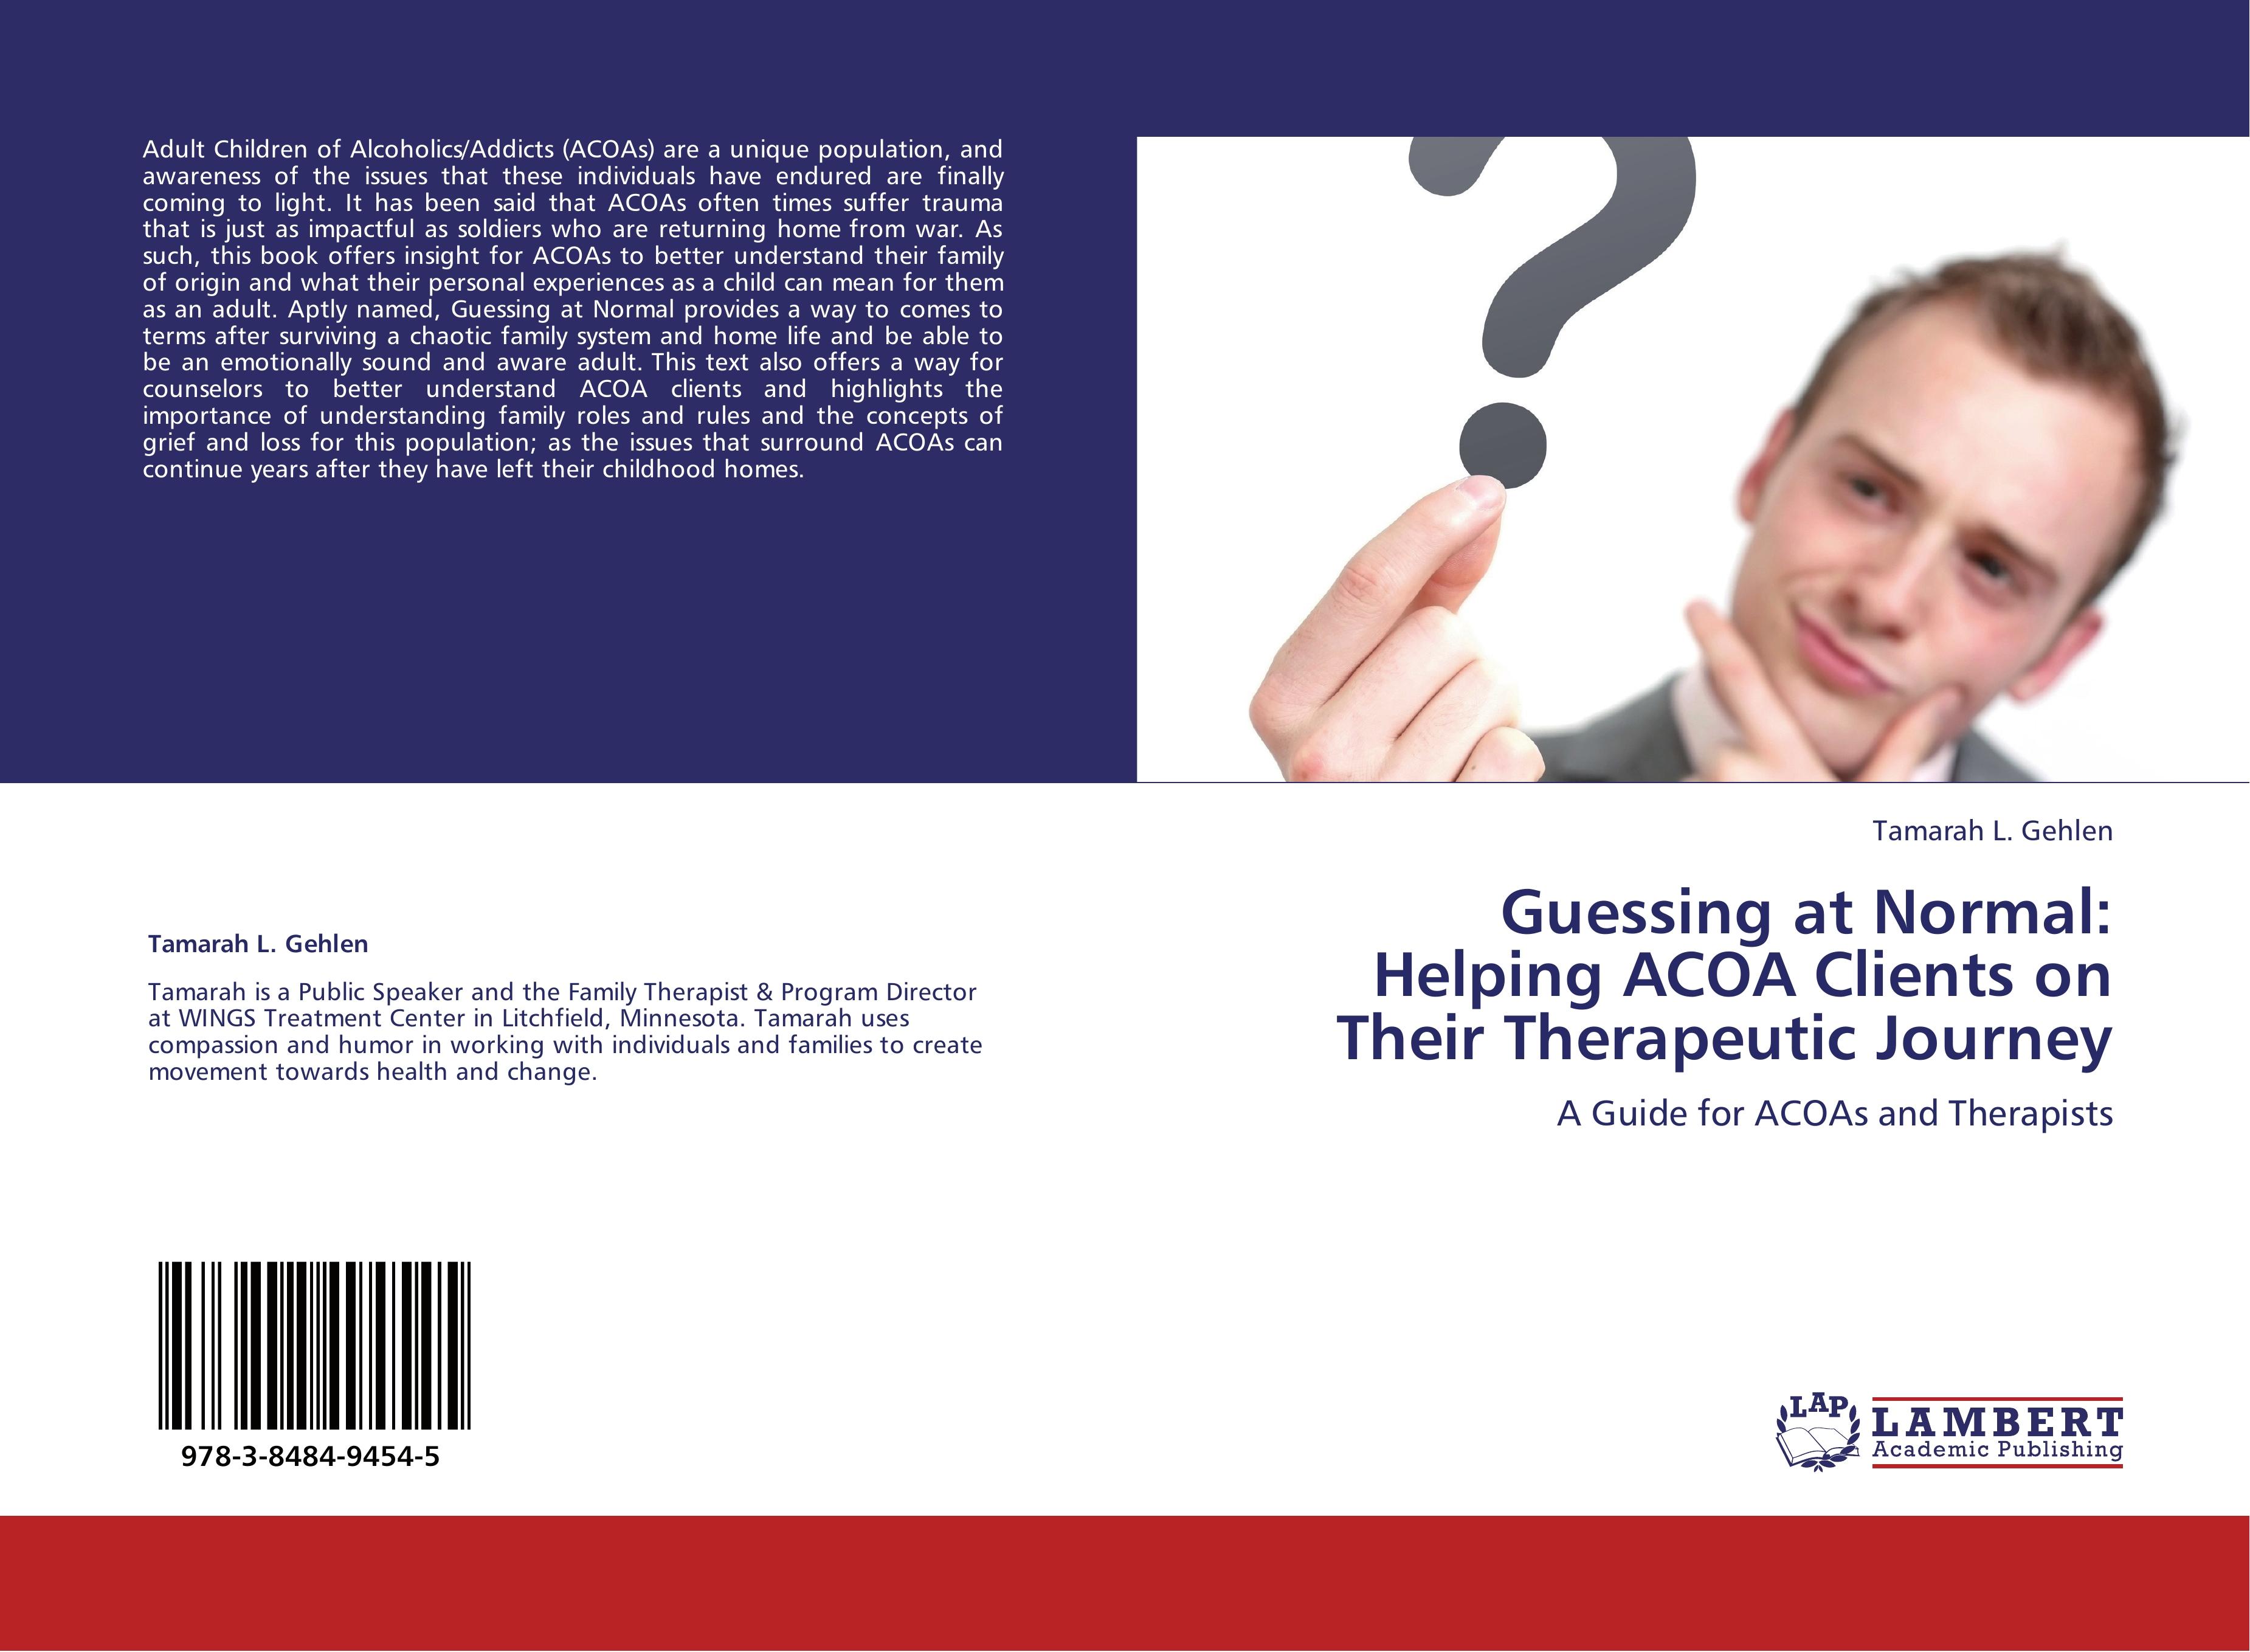 Guessing at Normal: Helping ACOA Clients on Their Therapeutic Journey | A Guide for ACOAs and Therapists | Tamarah L. Gehlen | Taschenbuch | Paperback | 52 S. | Englisch | 2012 | EAN 9783848494545 - Gehlen, Tamarah L.